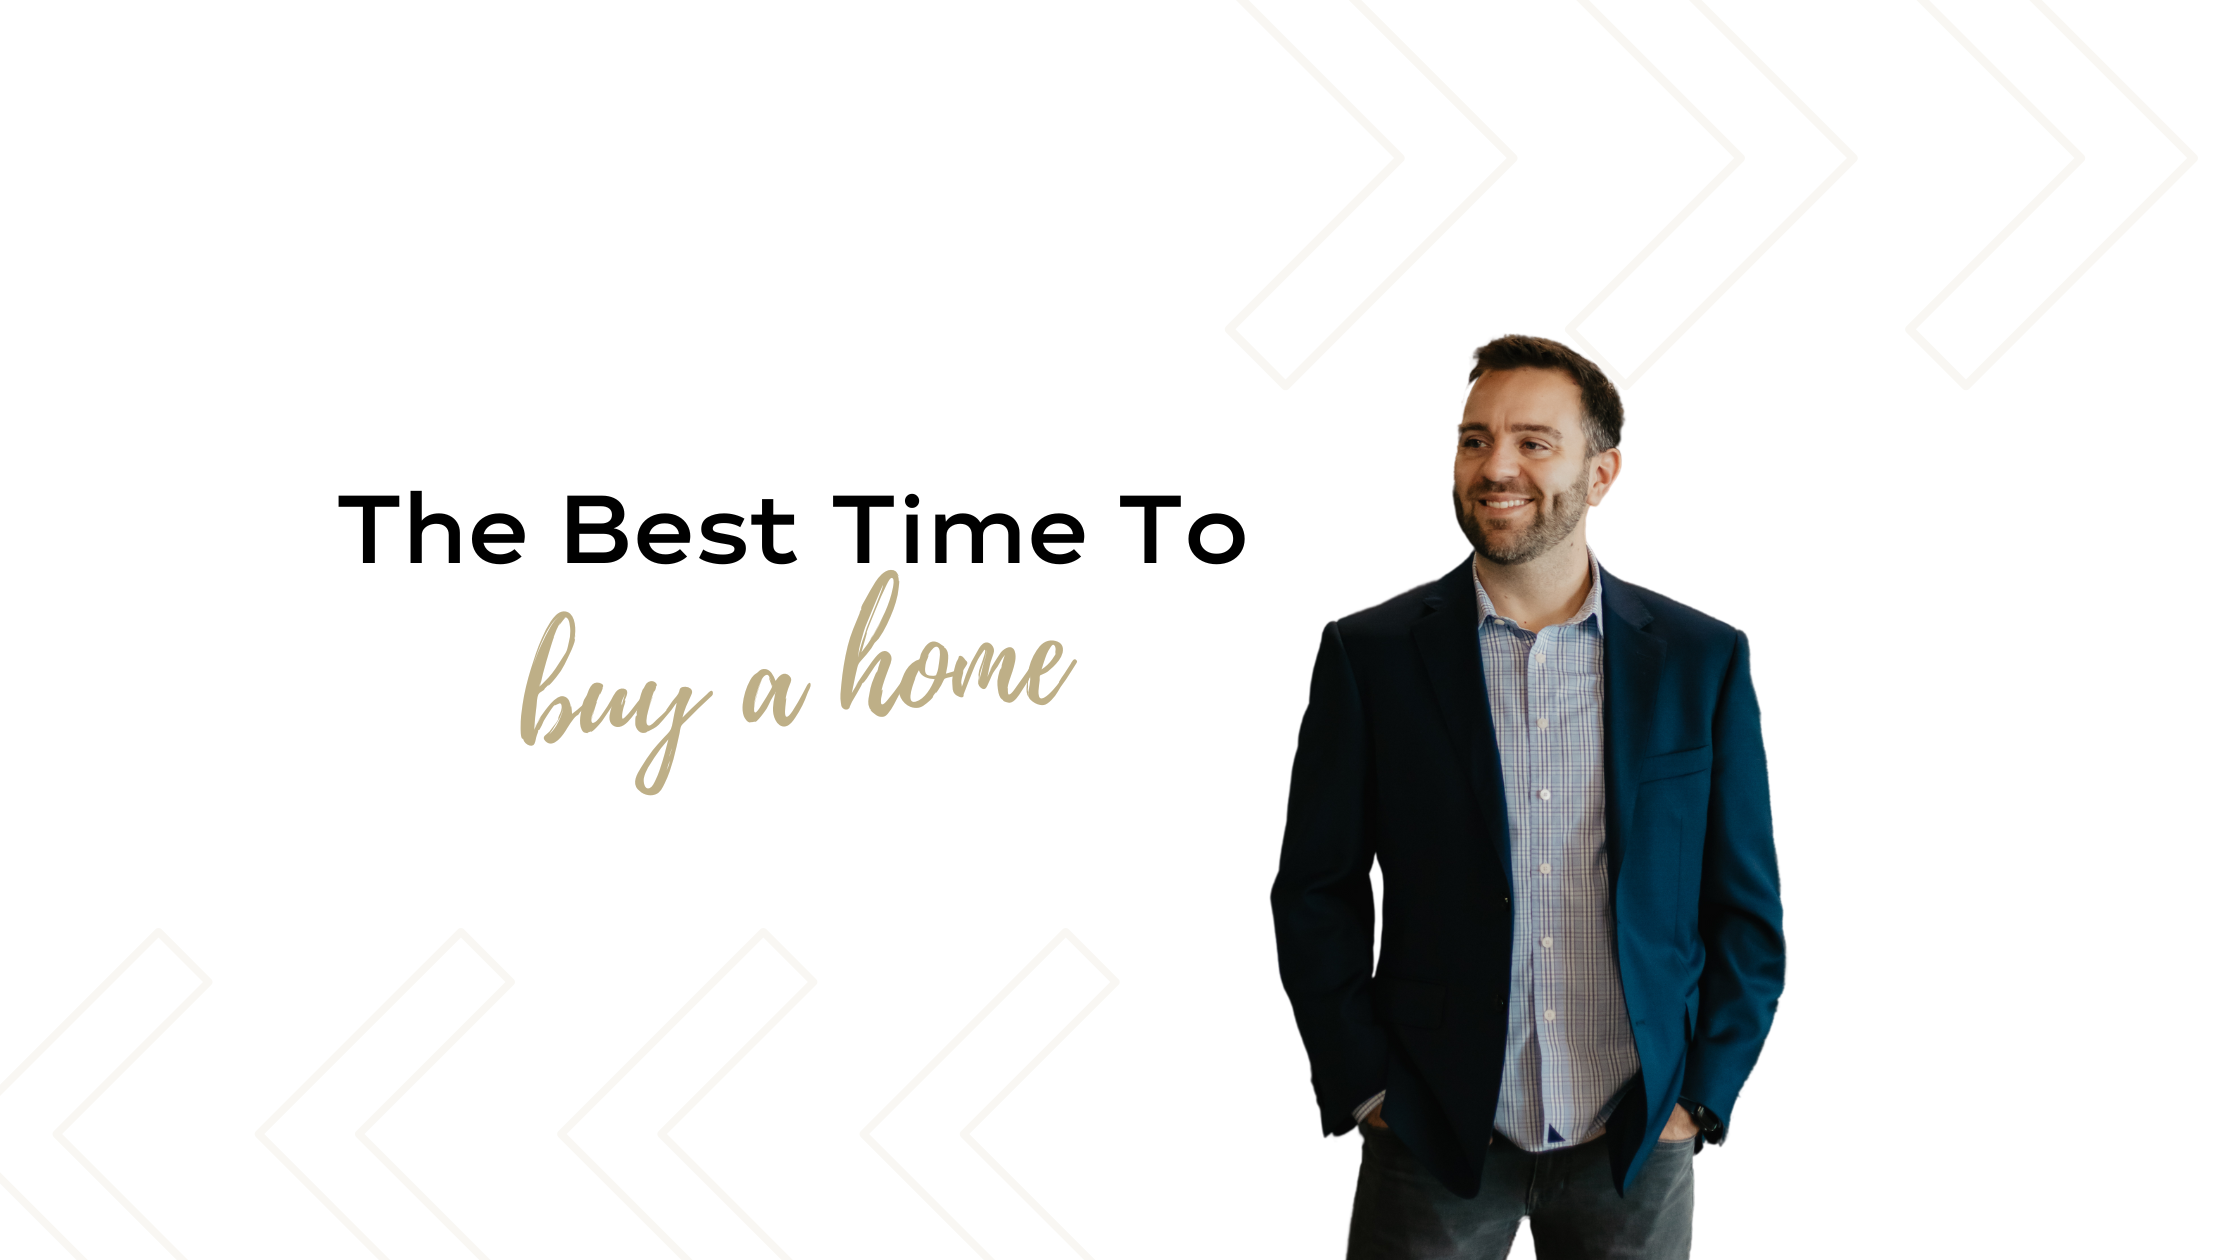 The best time to buy a home